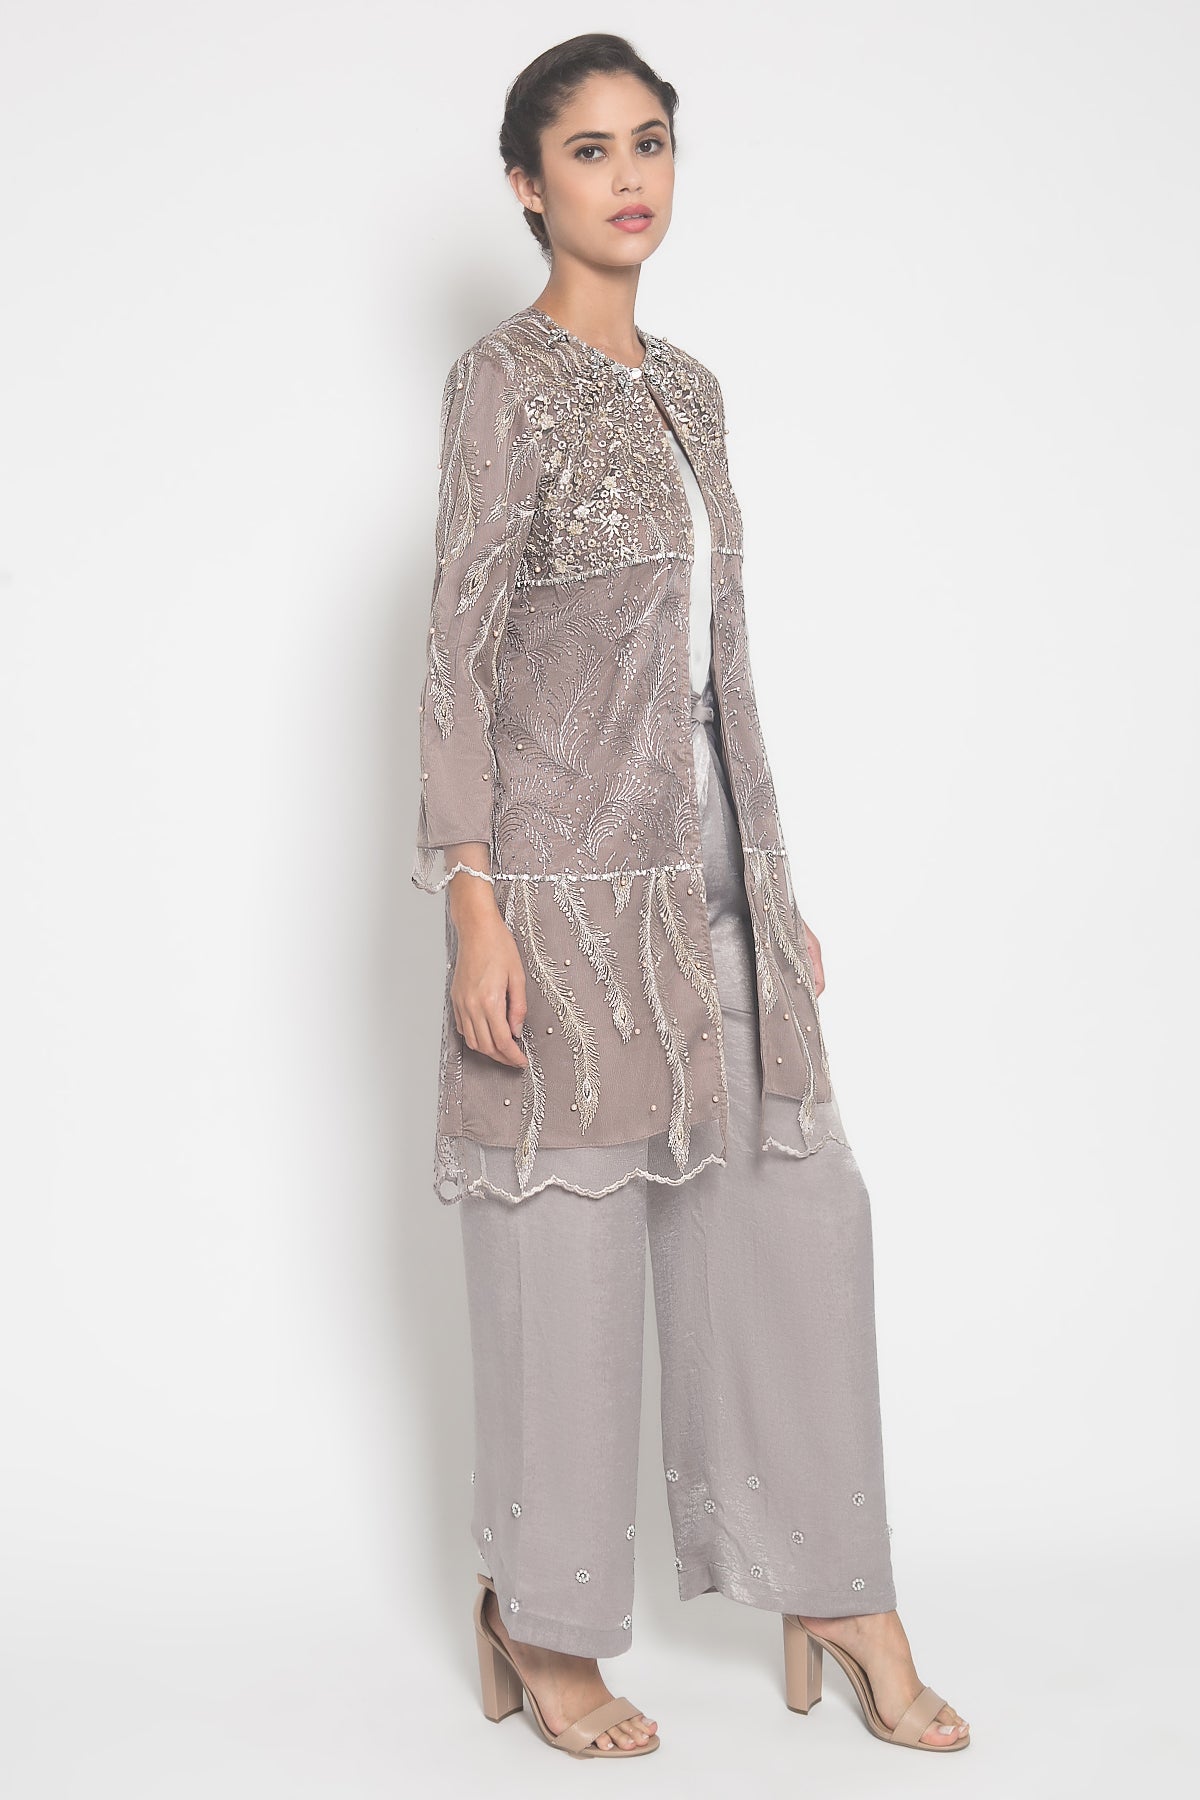 Jacquline Outer in Lilac Silver by KEIHANA Dresshaus 